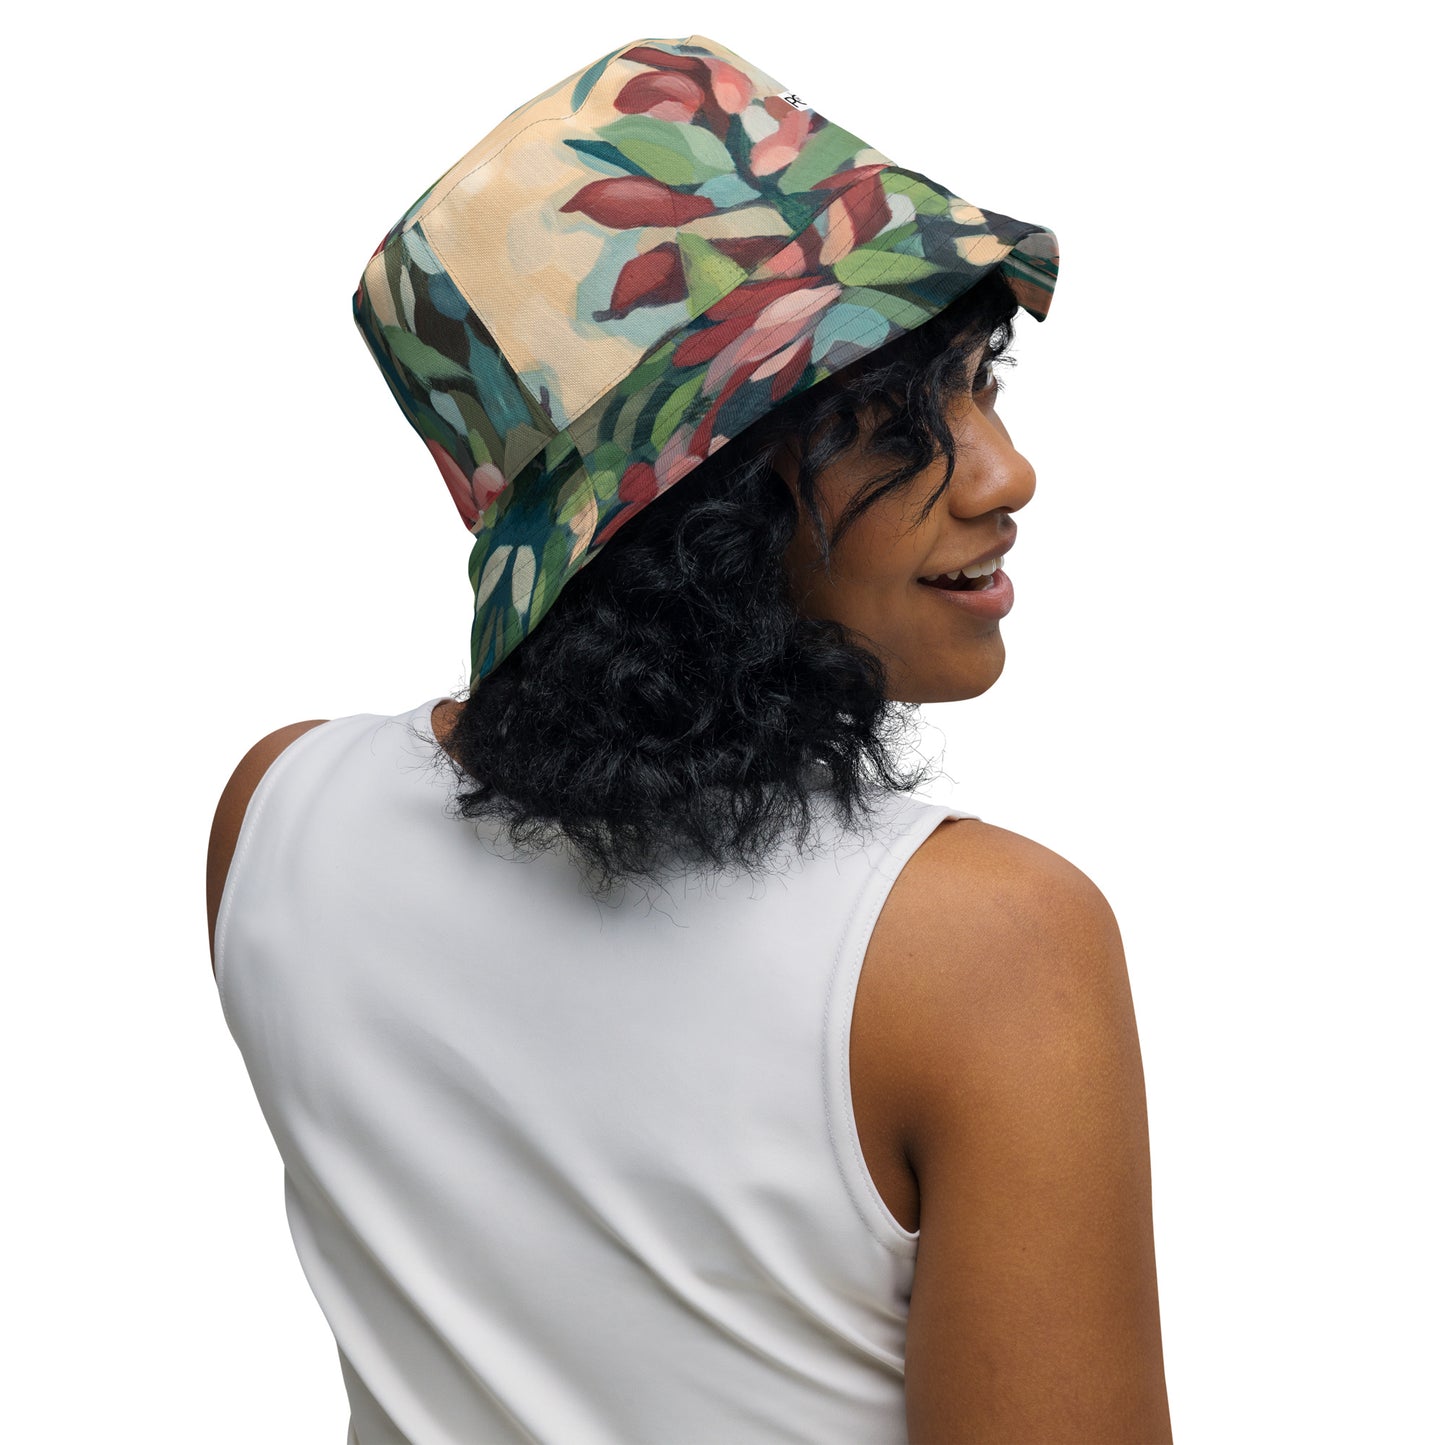 In Lieu of Flowers / Lovers Touch Reversible bucket hat